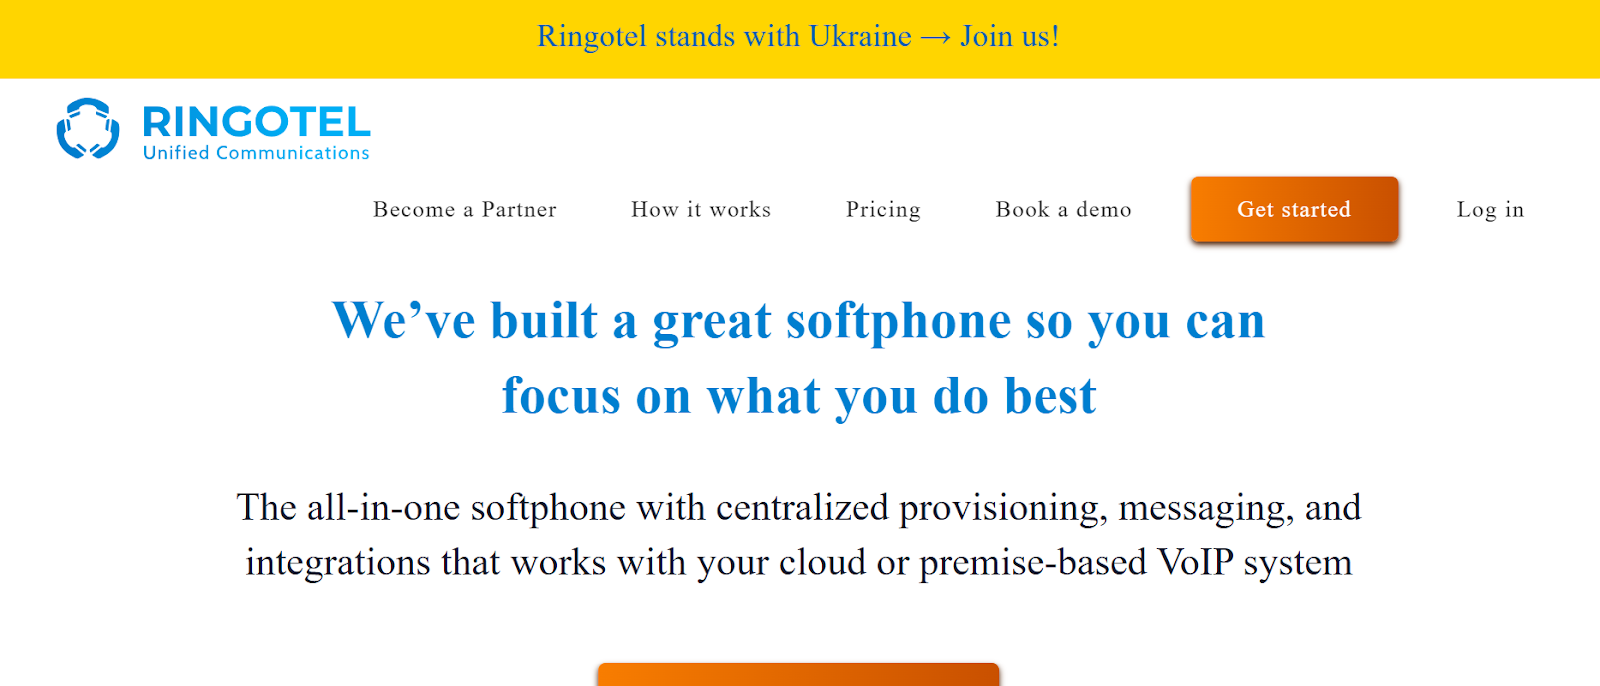 Ringotel website snapshot highlighting the services it offers.